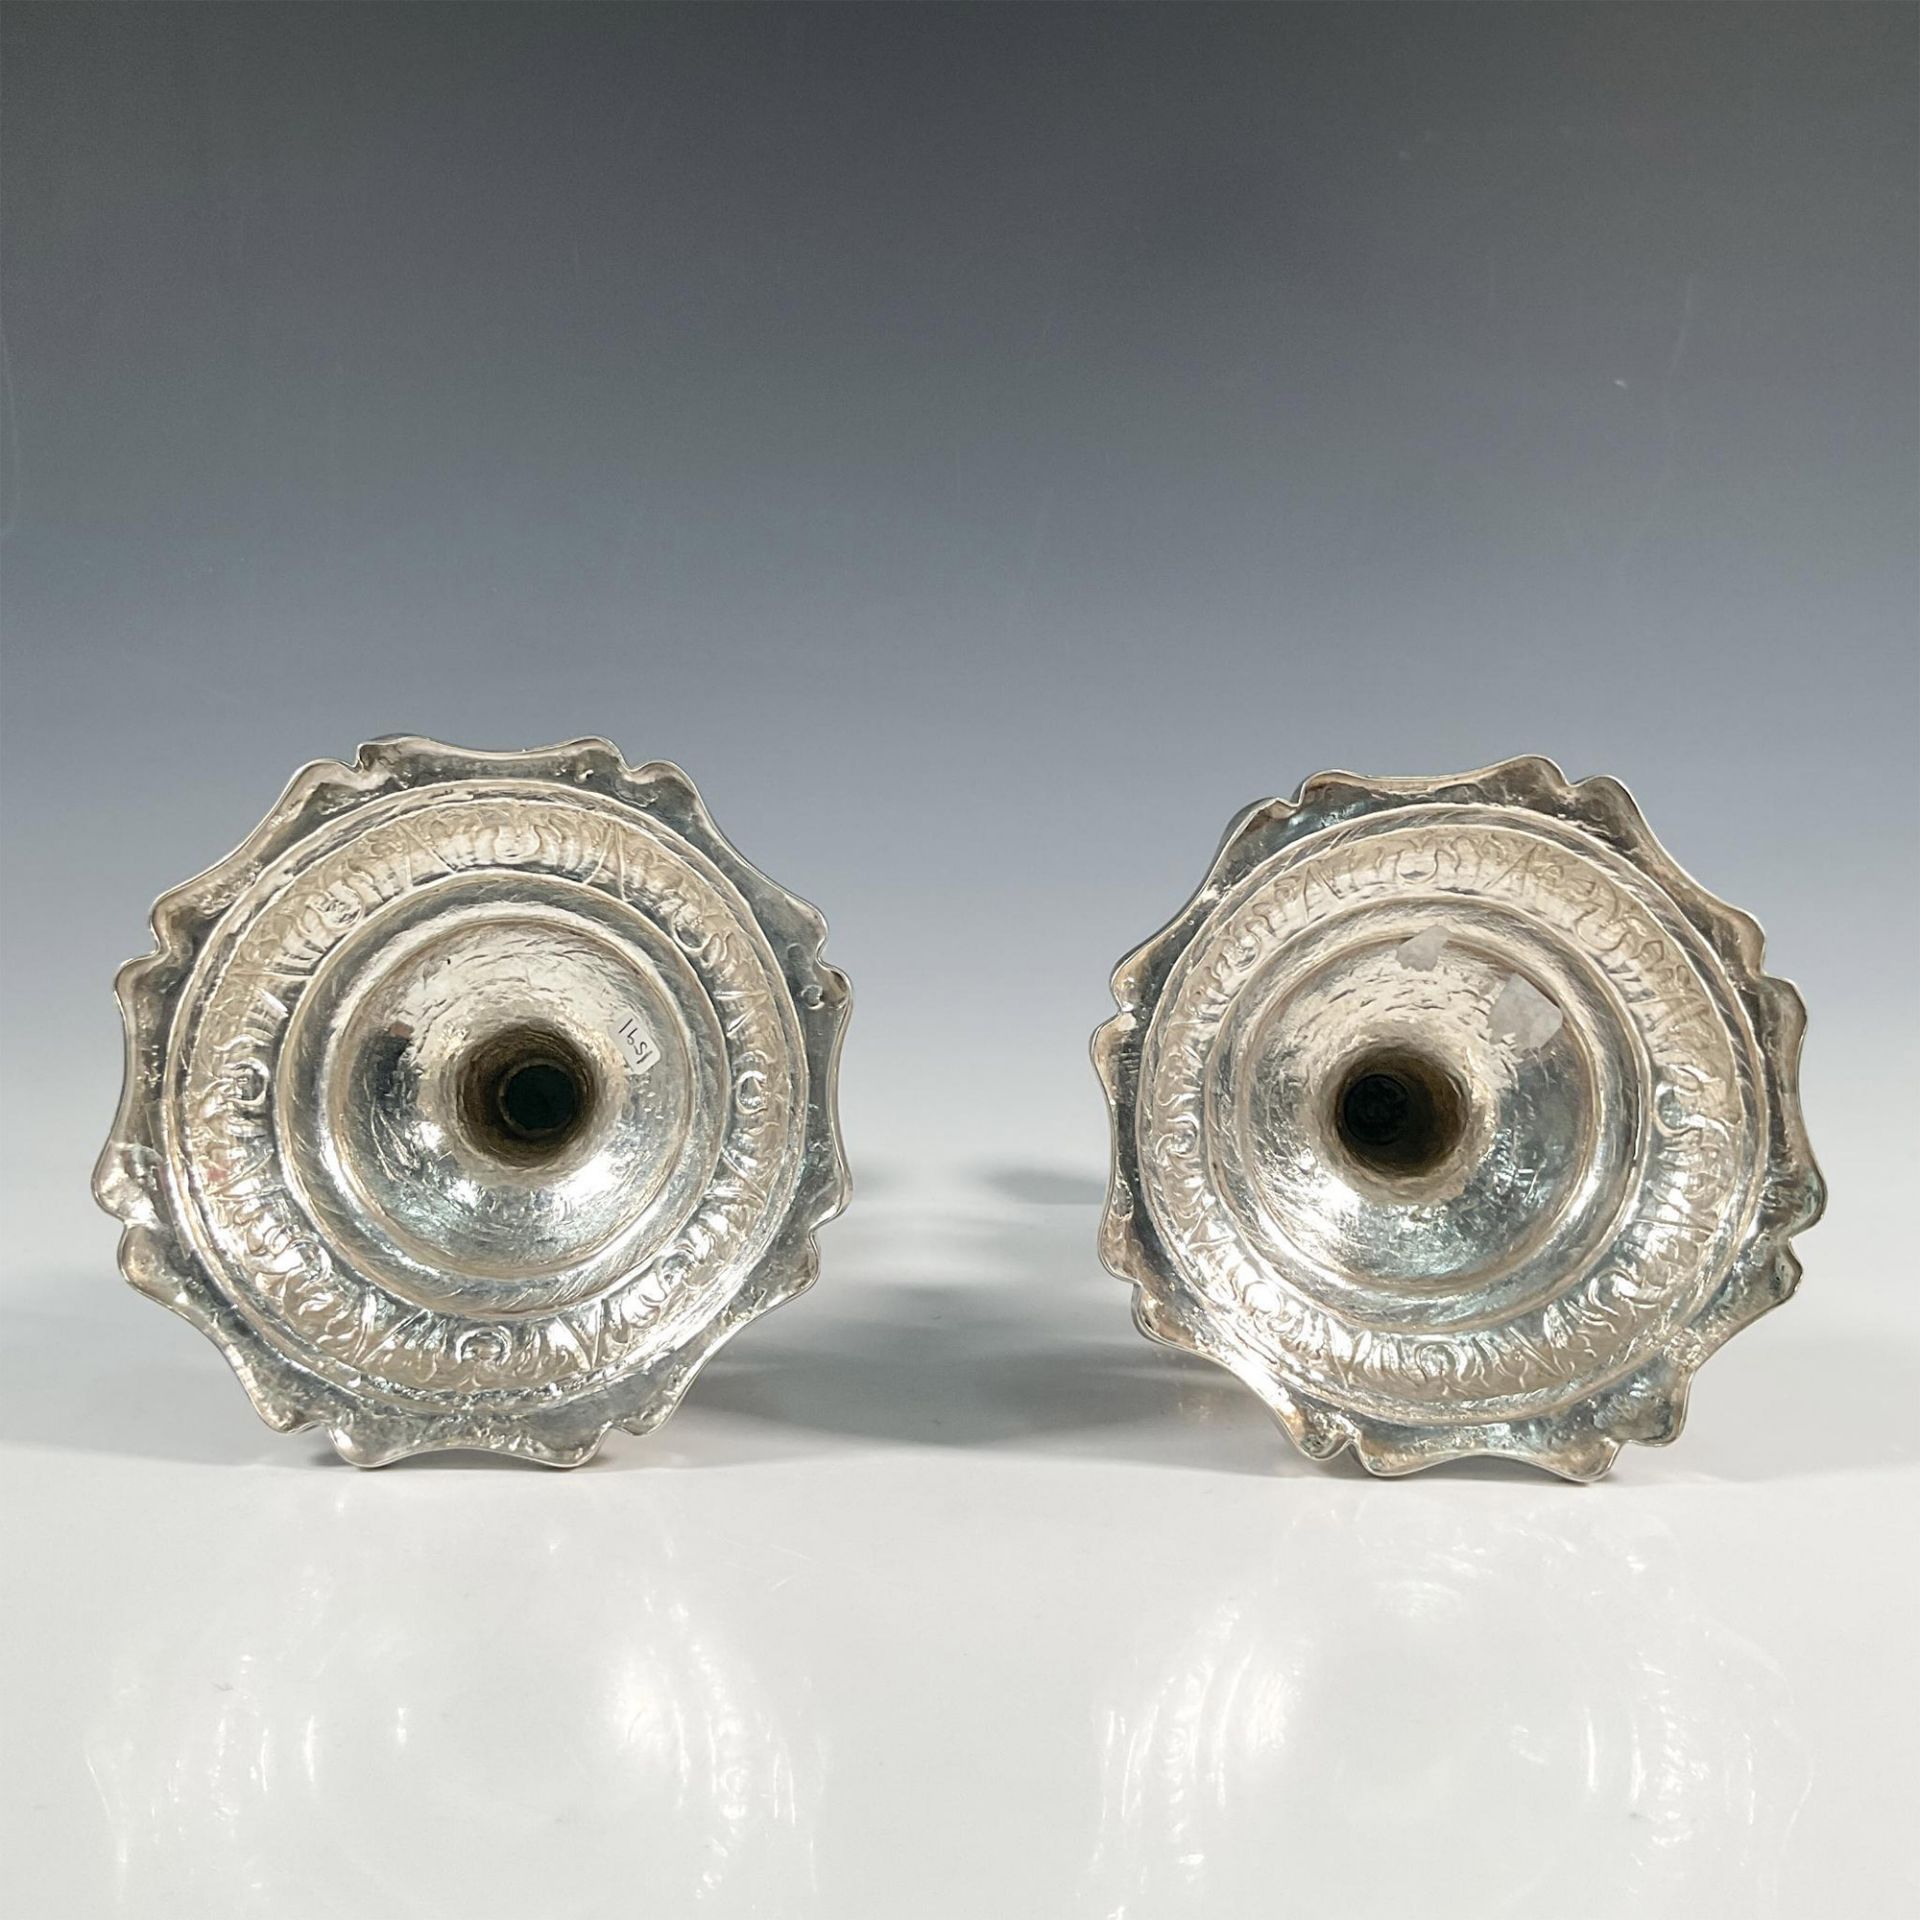 Pair of Russian Sterling Silver Candlesticks - Image 3 of 3